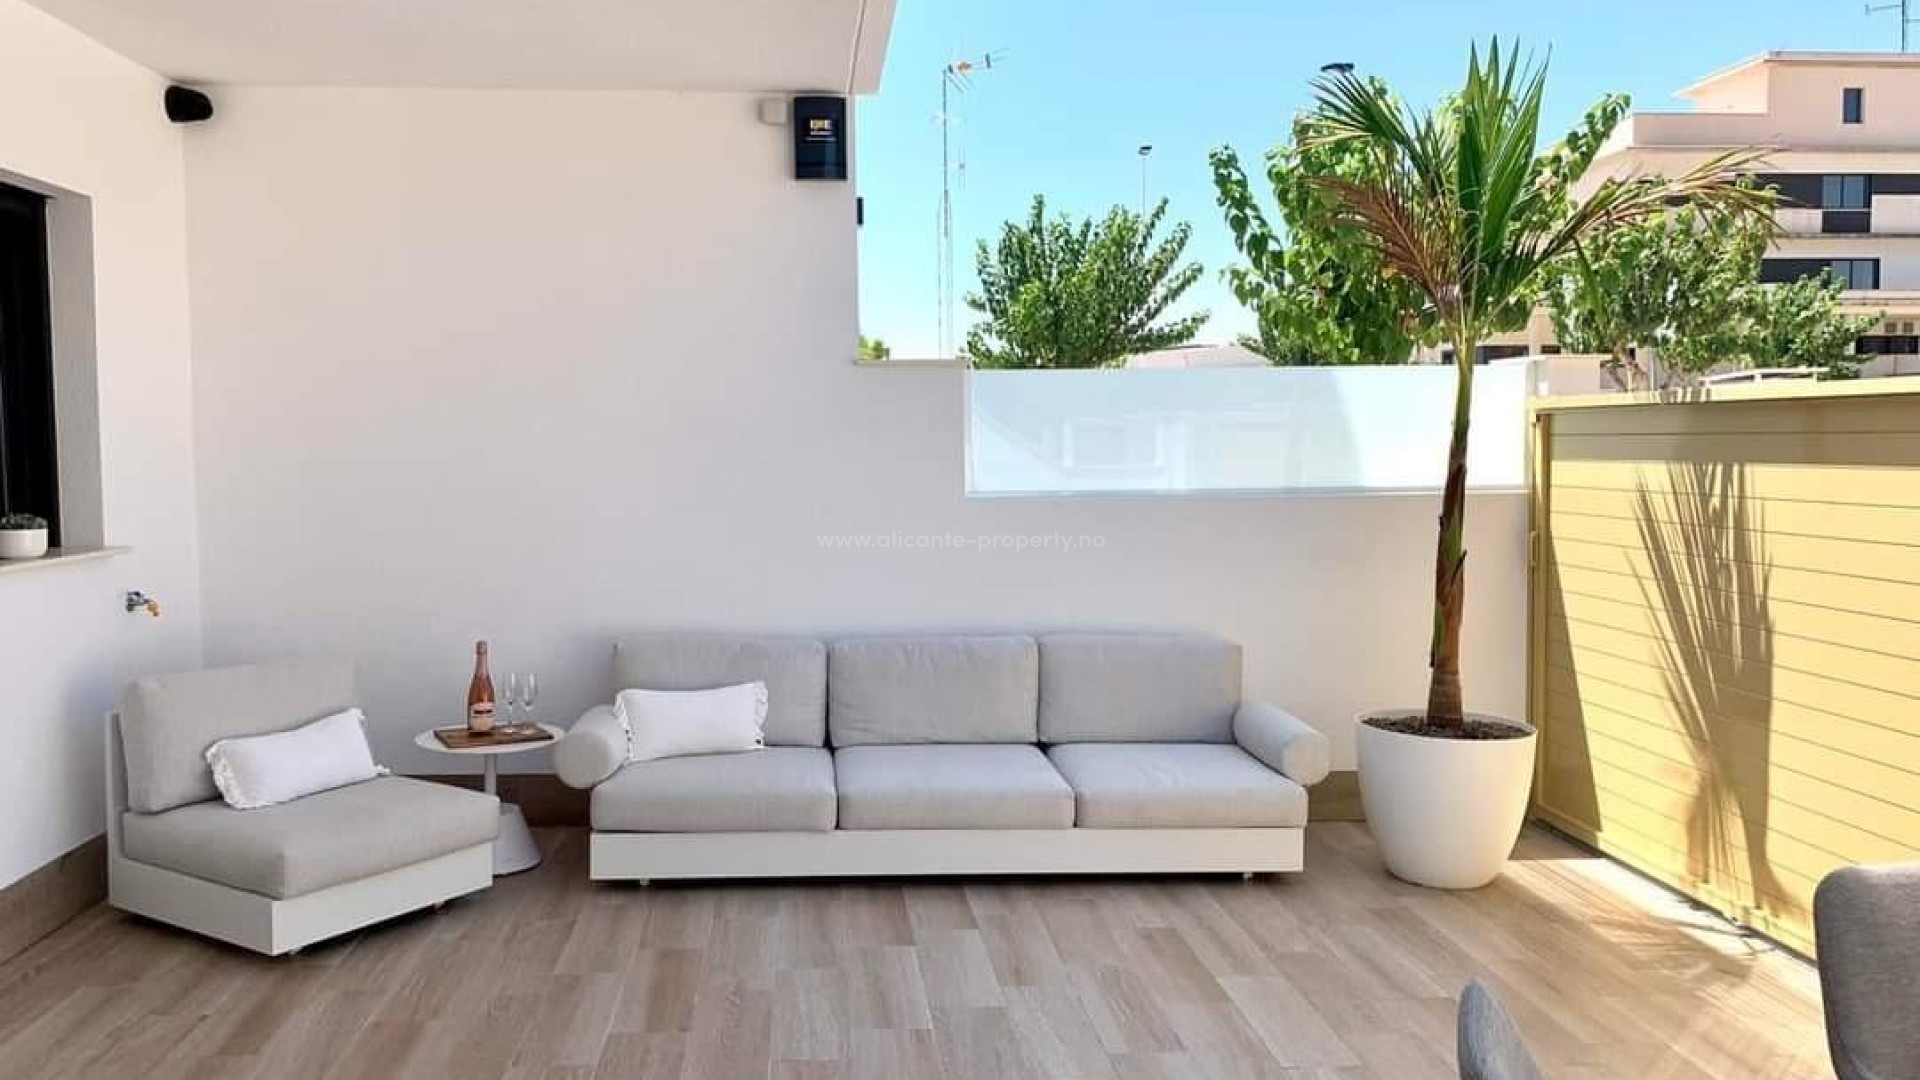 Modern apartments and penthouses in Pilar de la Horadada with private solarium, 2/3 bedrooms, 2 bathrooms, communal pool and outdoor area